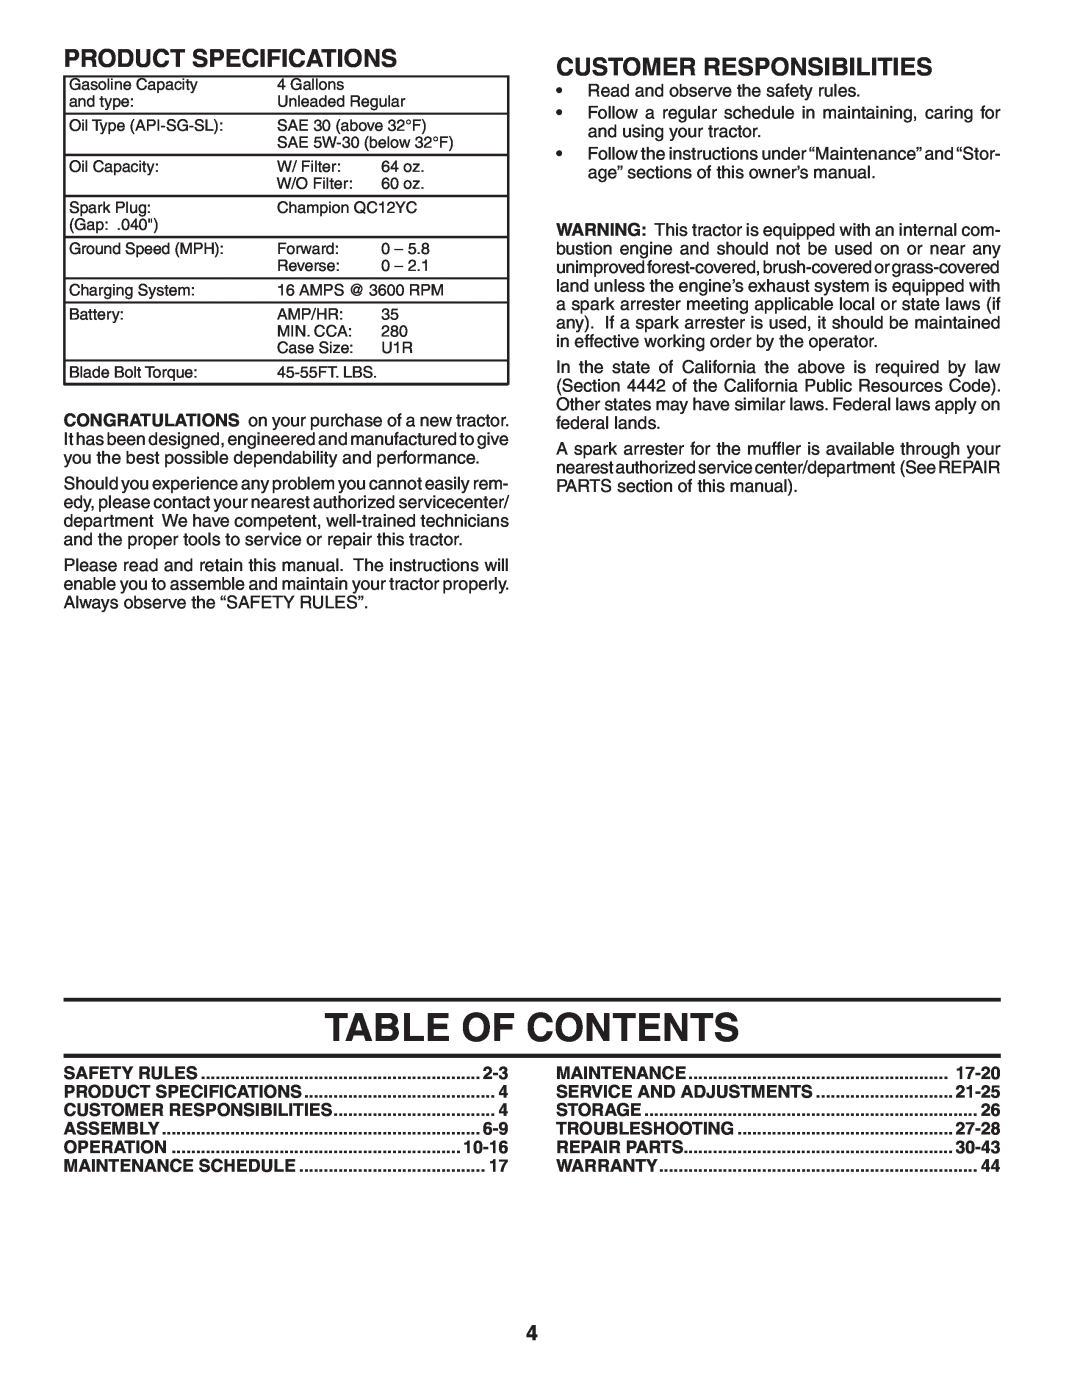 Husqvarna GTH2454T owner manual Table Of Contents, Product Specifications, Customer Responsibilities 